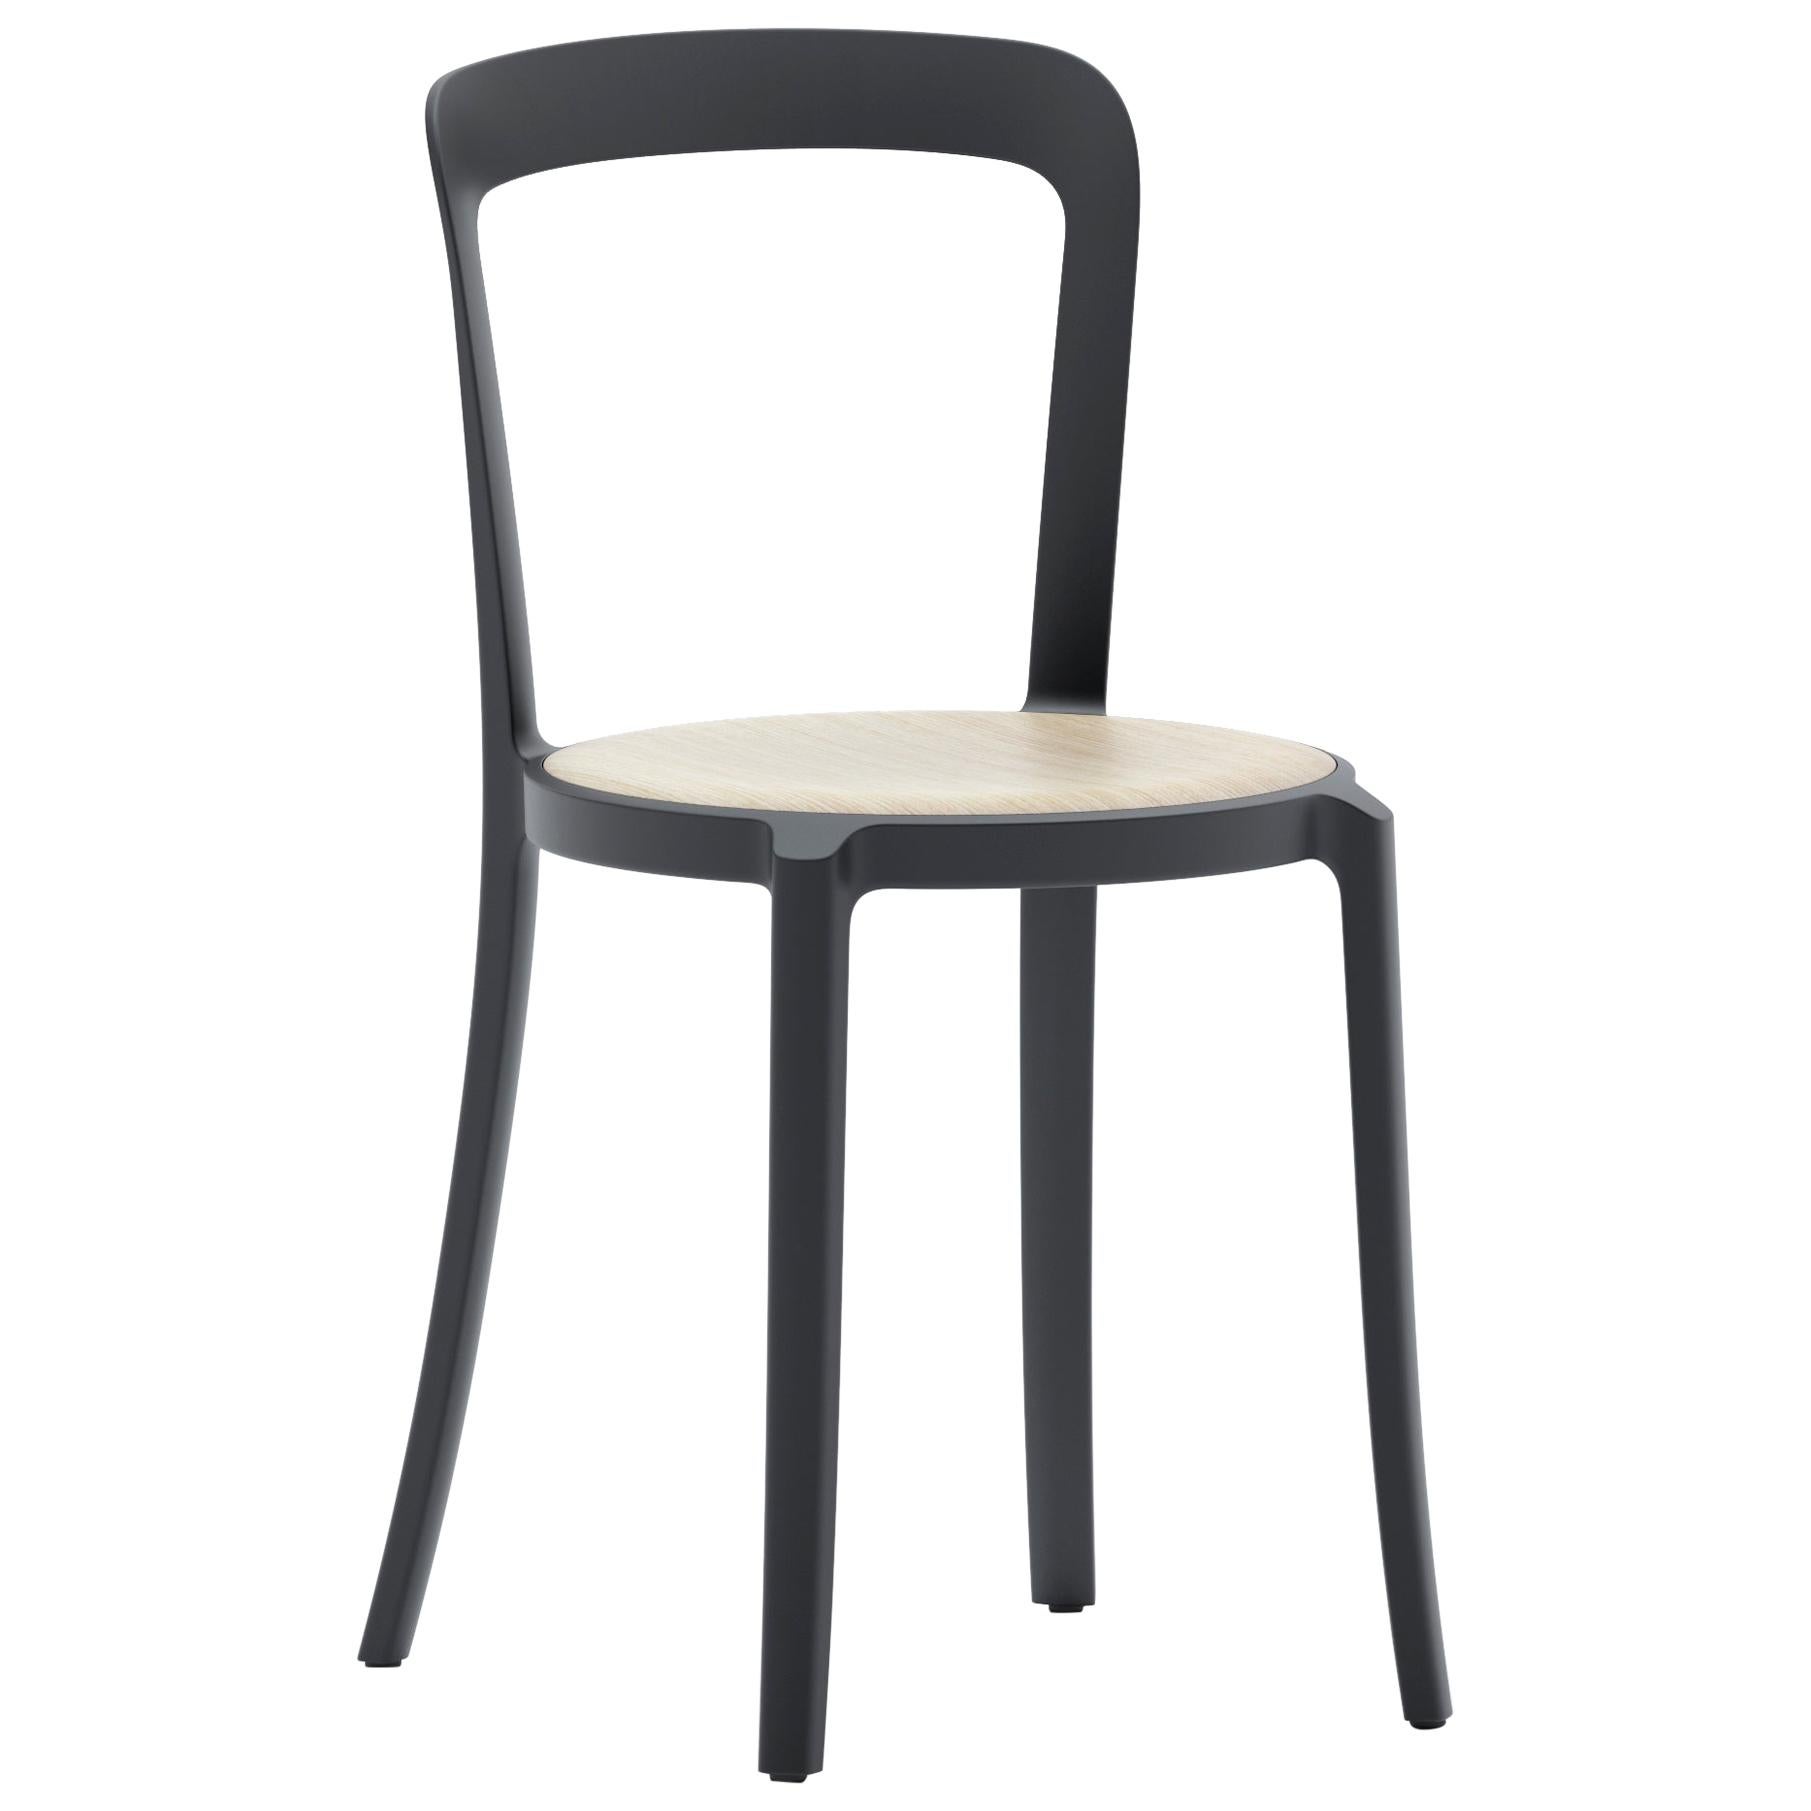 Emeco On & On Stacking Chair in Black with Oak Plywood seat by Barber & Osgerby